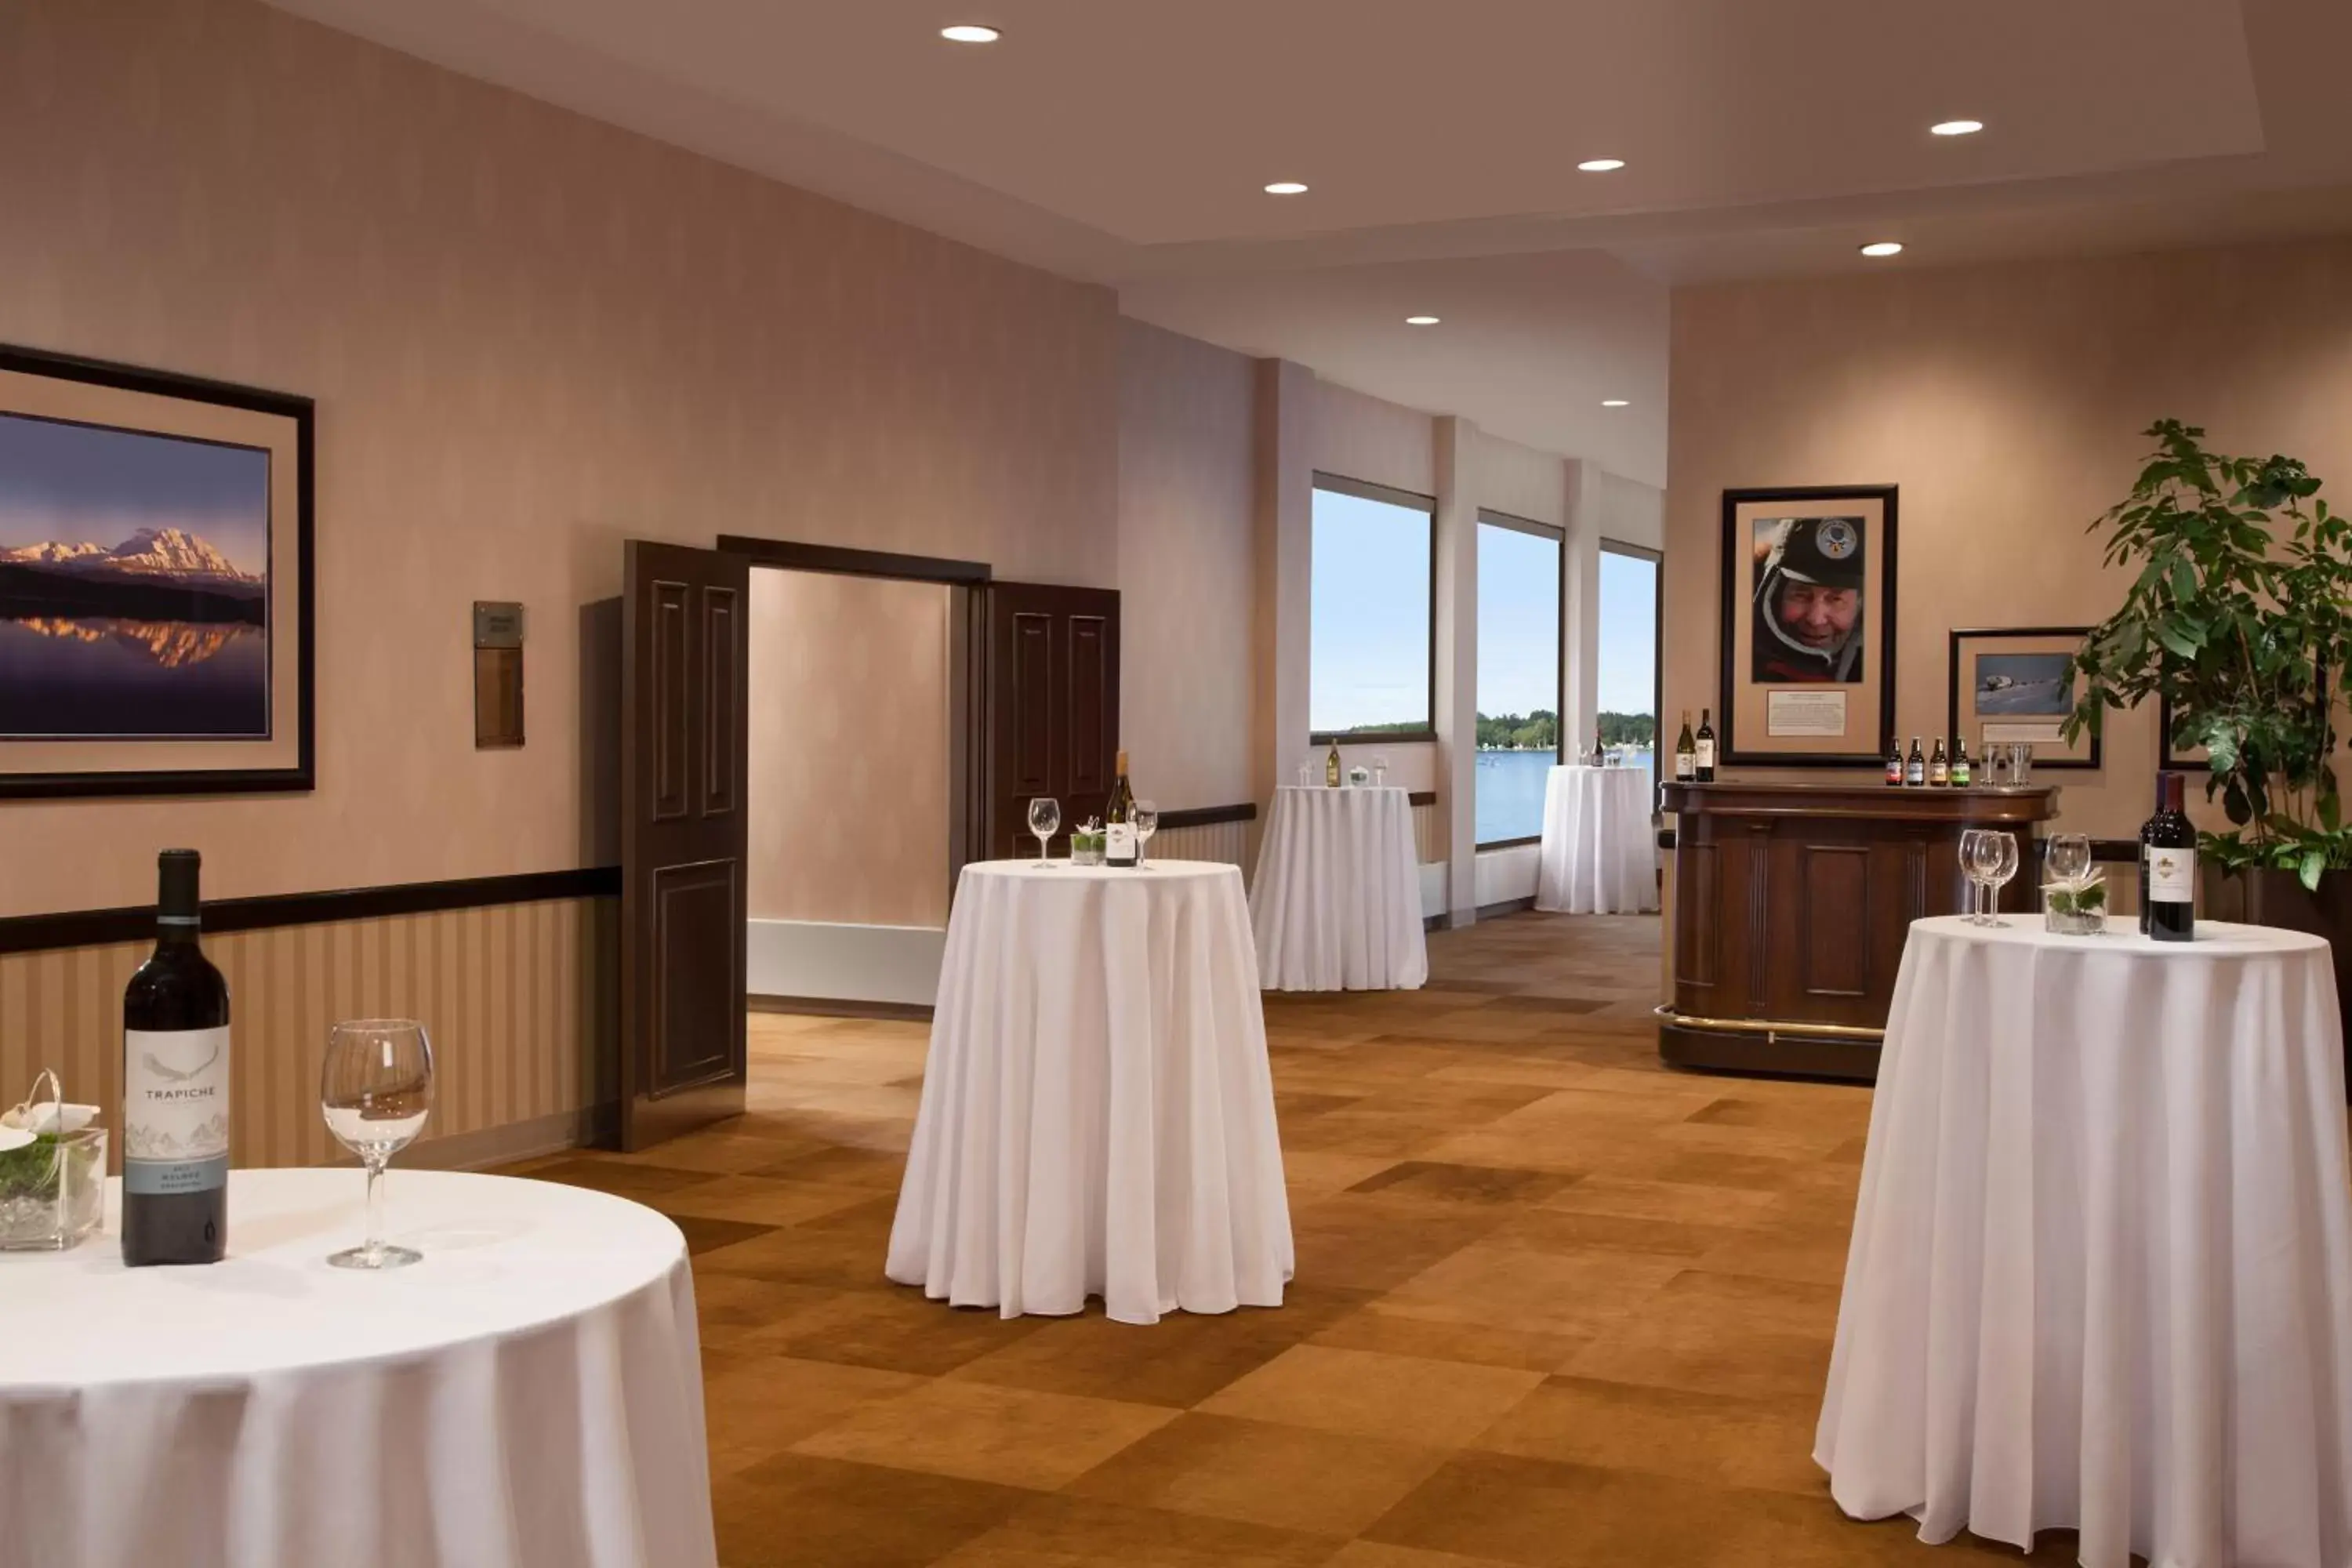 Banquet/Function facilities in The Lakefront Anchorage